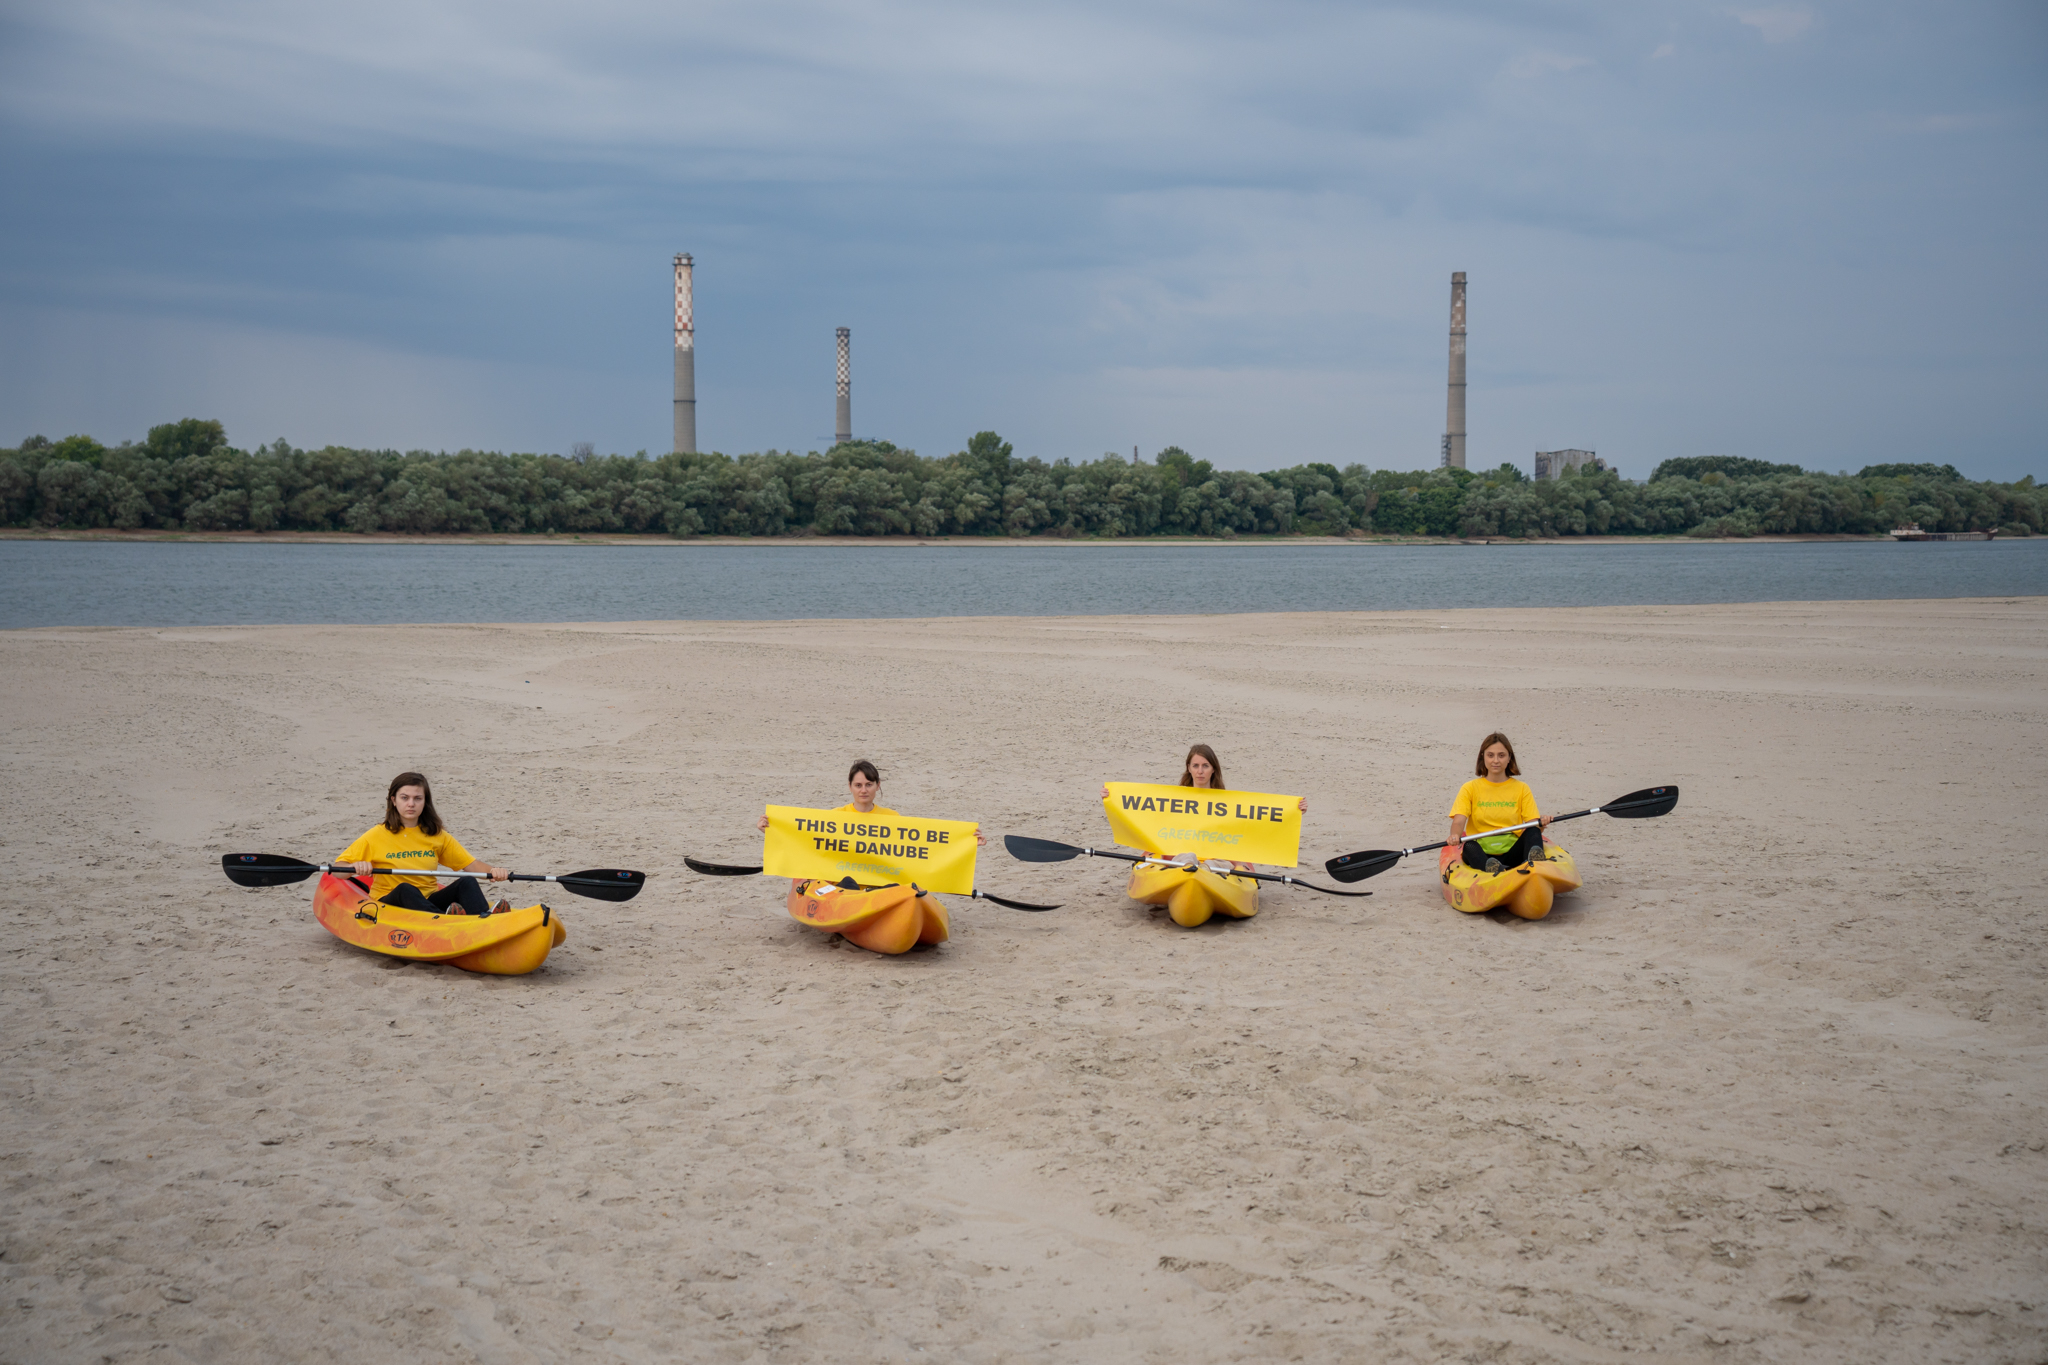 Four campaigners in kayaks on a dry river bank. Their signs read "This used to be the Danube" and "Water is life"